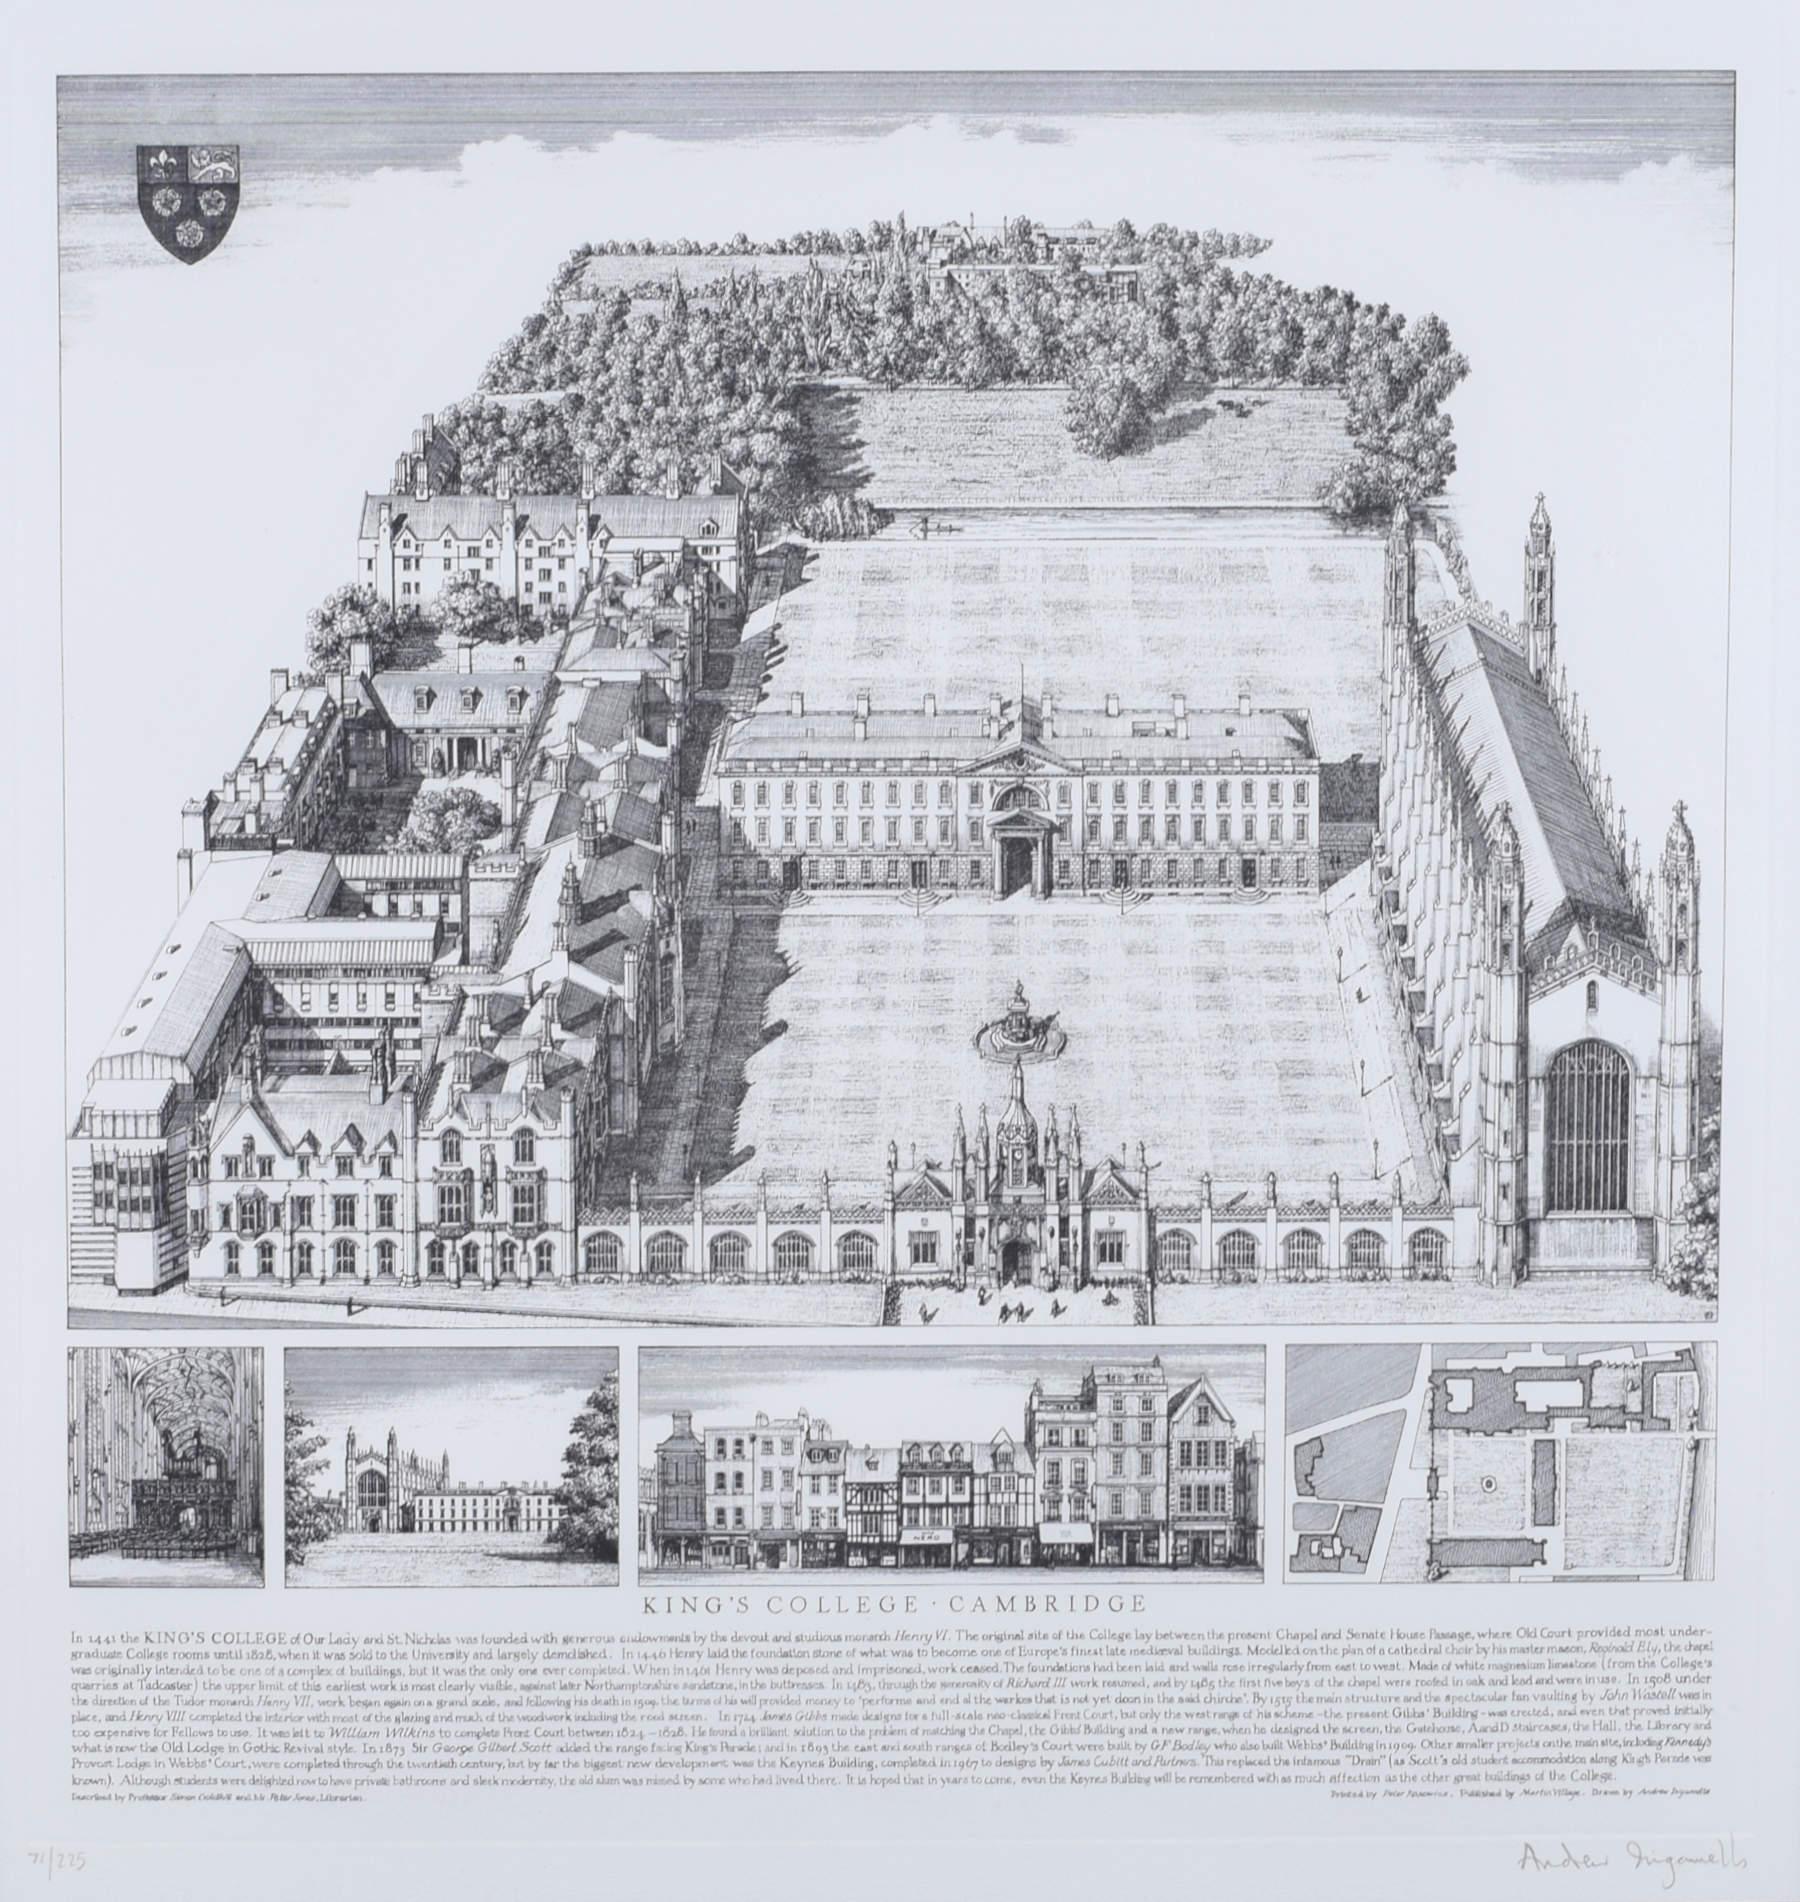 King's College, Cambridge etching by Andrew Ingamells